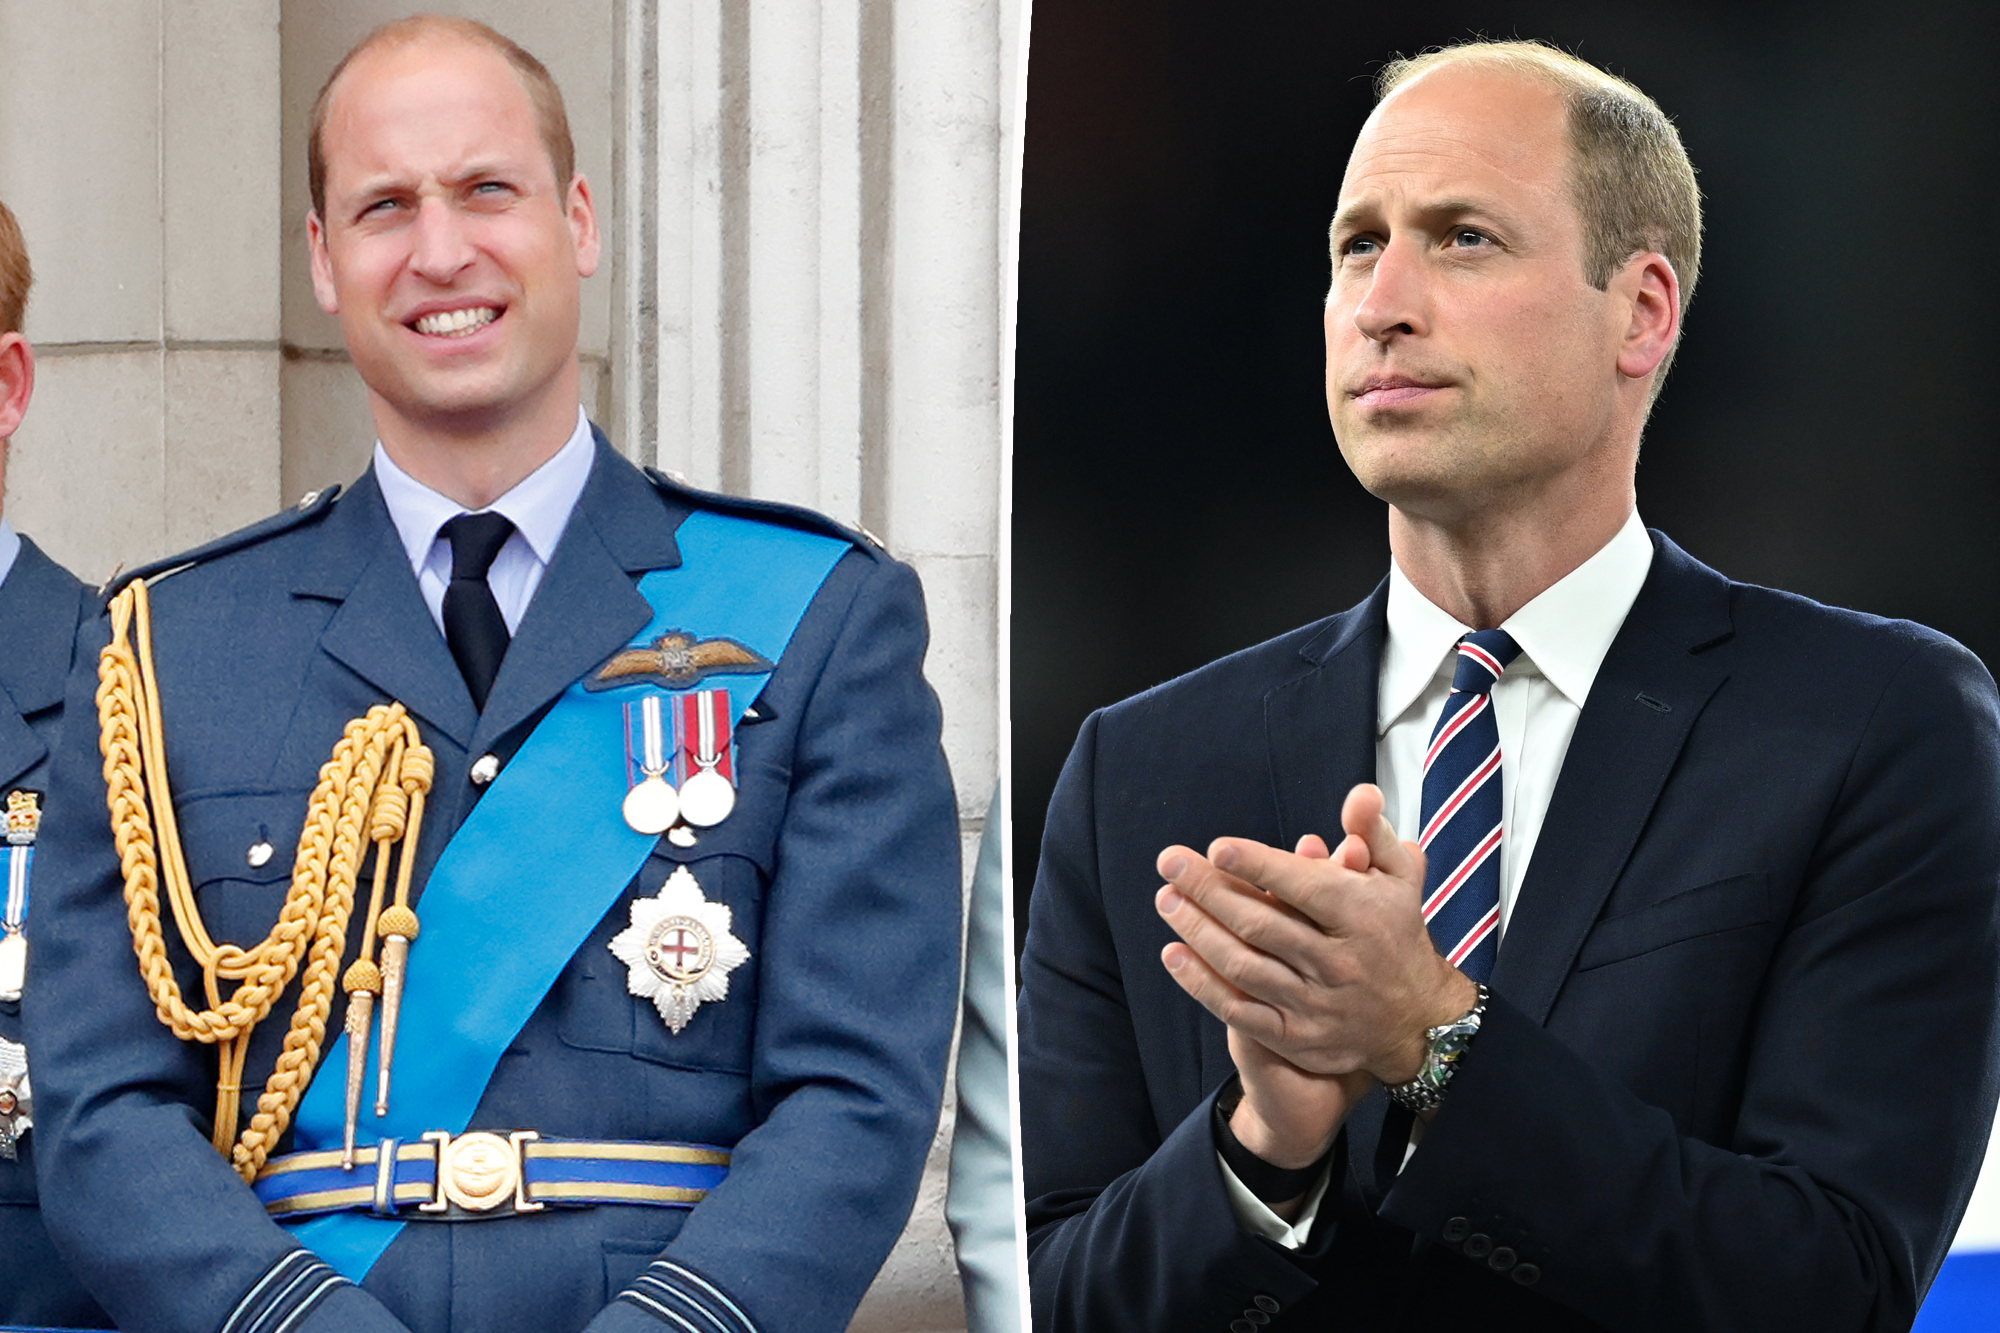 Prince William's Massive Income Revealed After Title Change Sparks Buzz